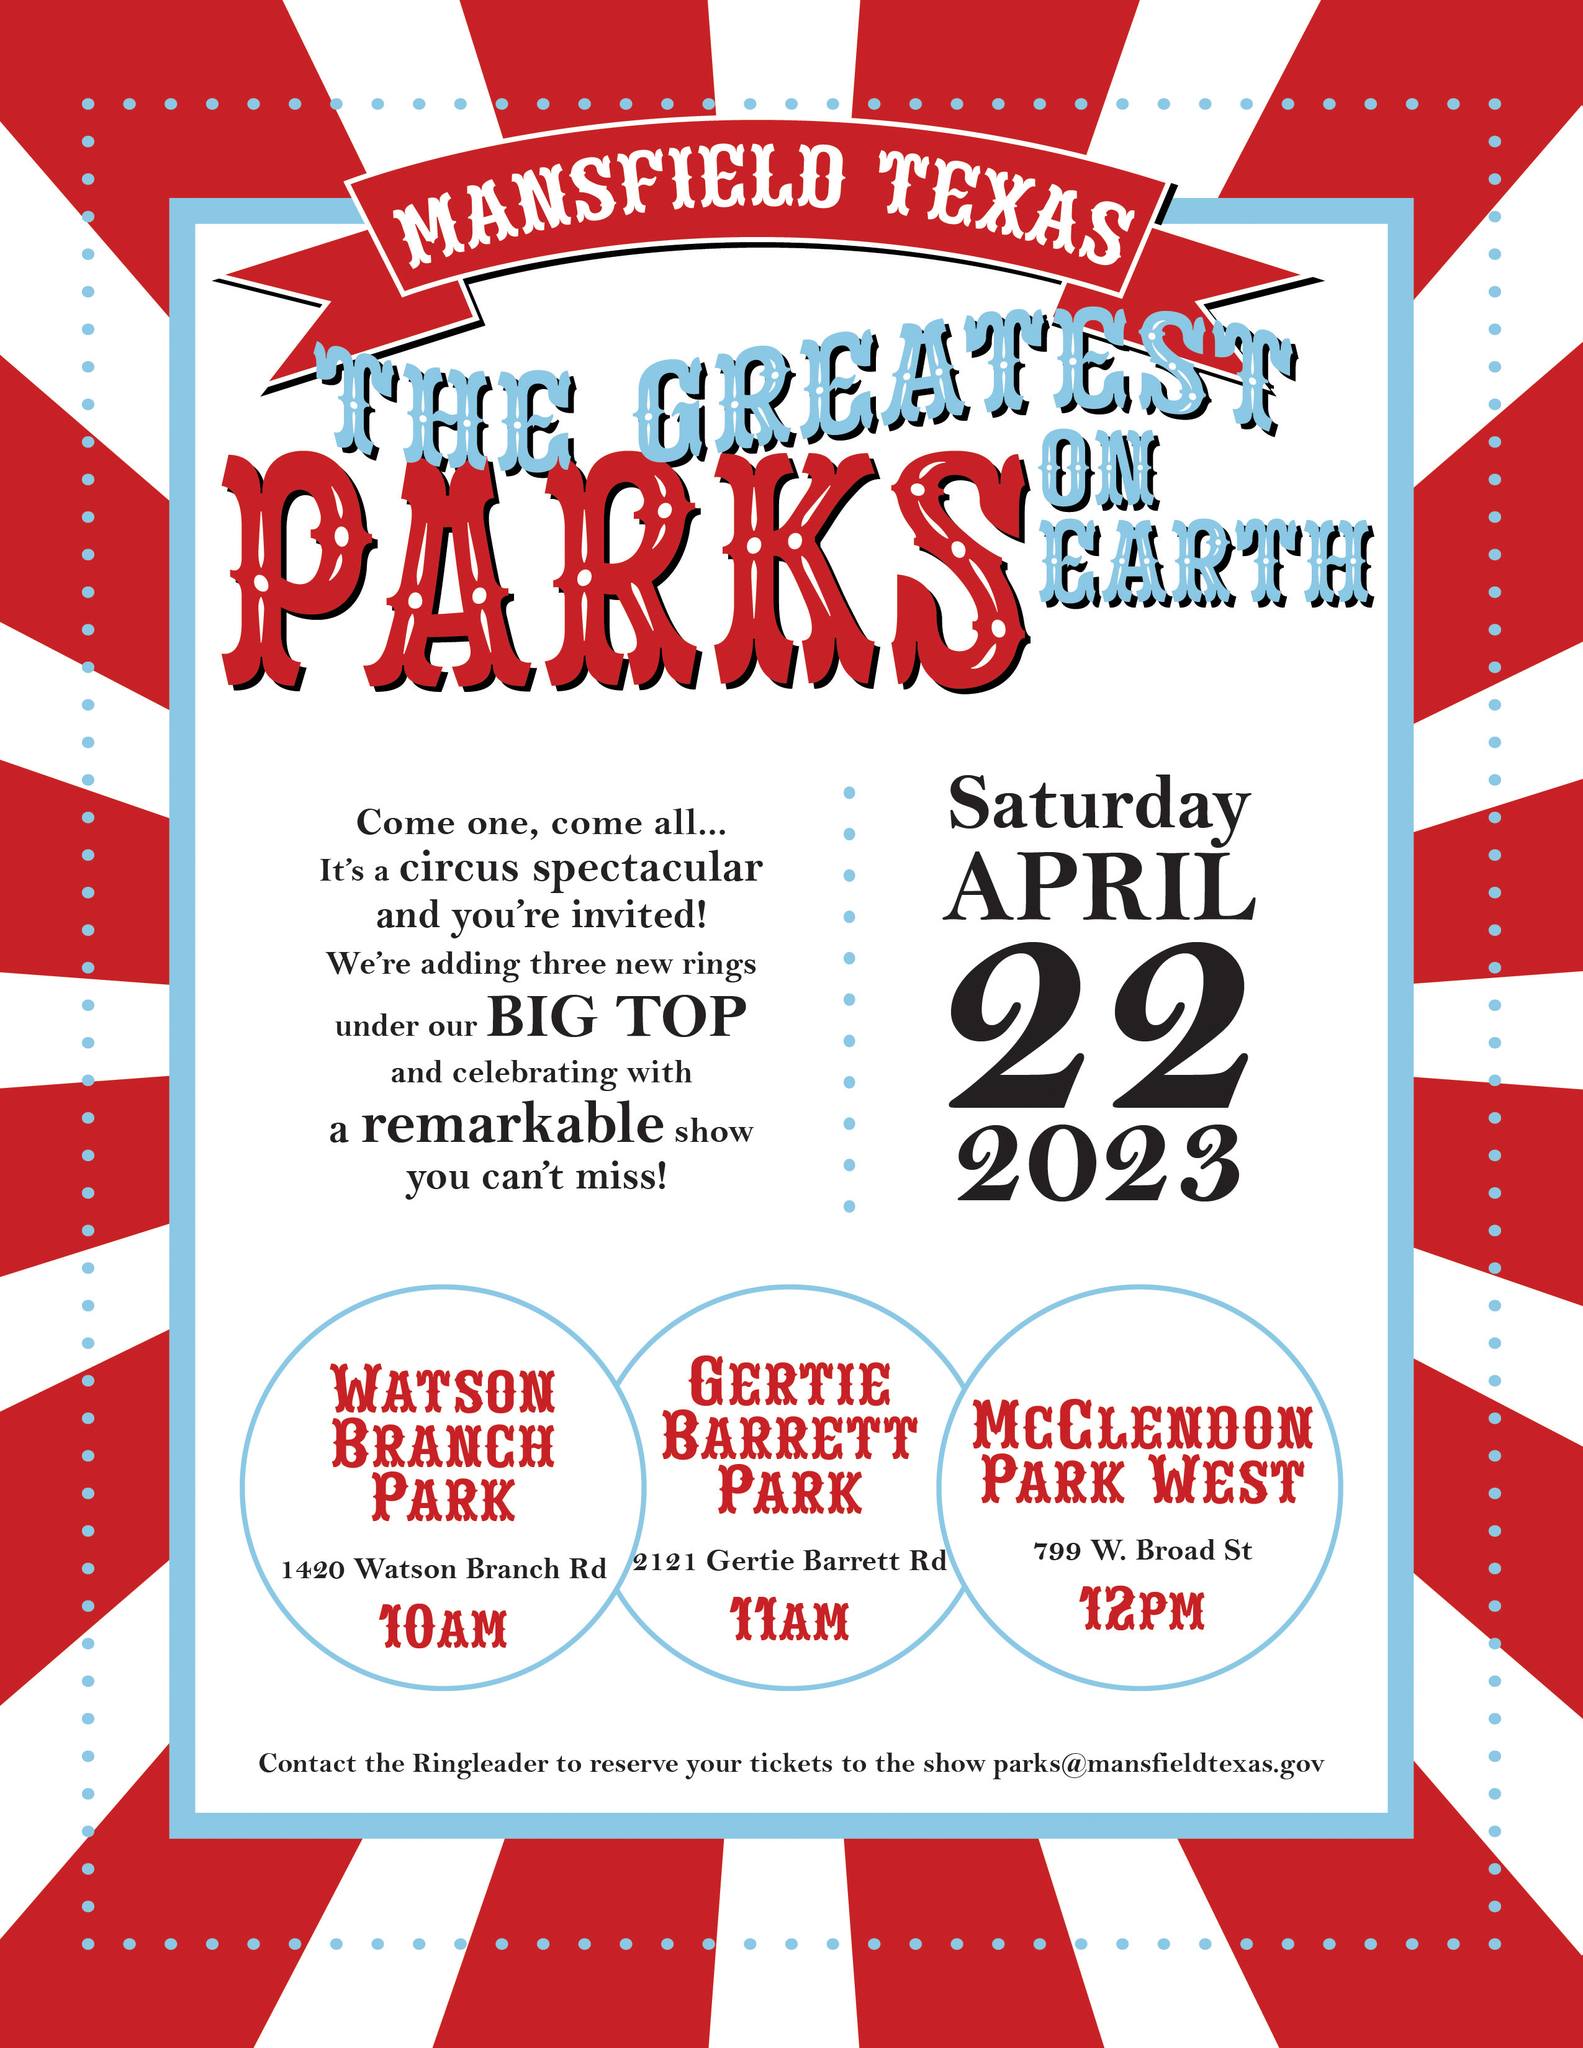 red and white flyer with text for greatest parks on earth